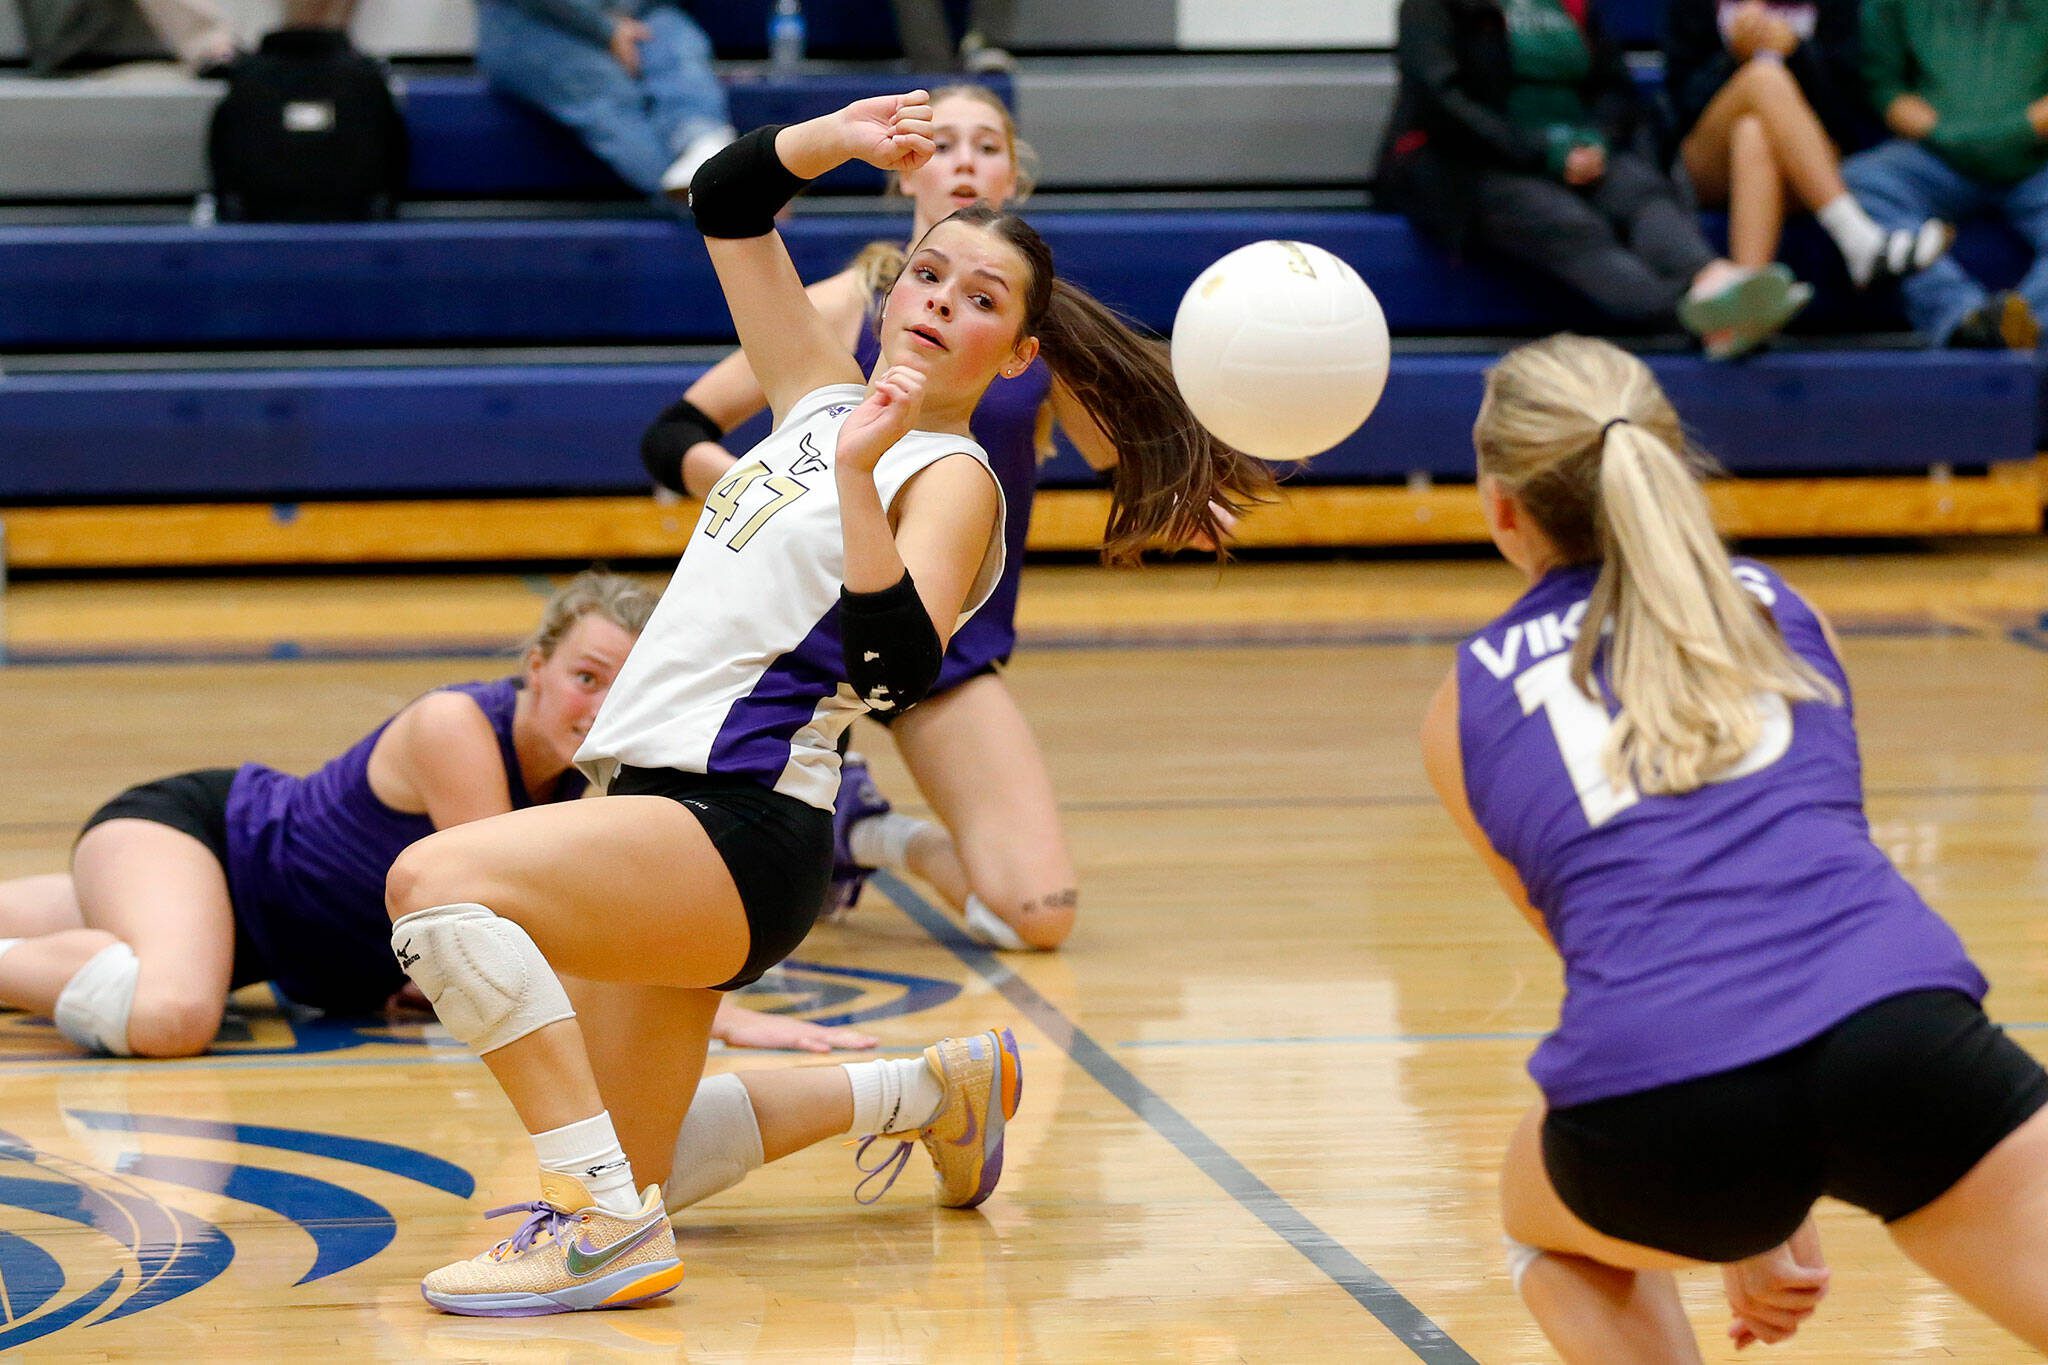 Lake Stevens players	hit the court trying to save the ball against Glacier Peak on Tuesday at Glacier Peak High School in Snohomish. (Ryan Berry / The Herald)